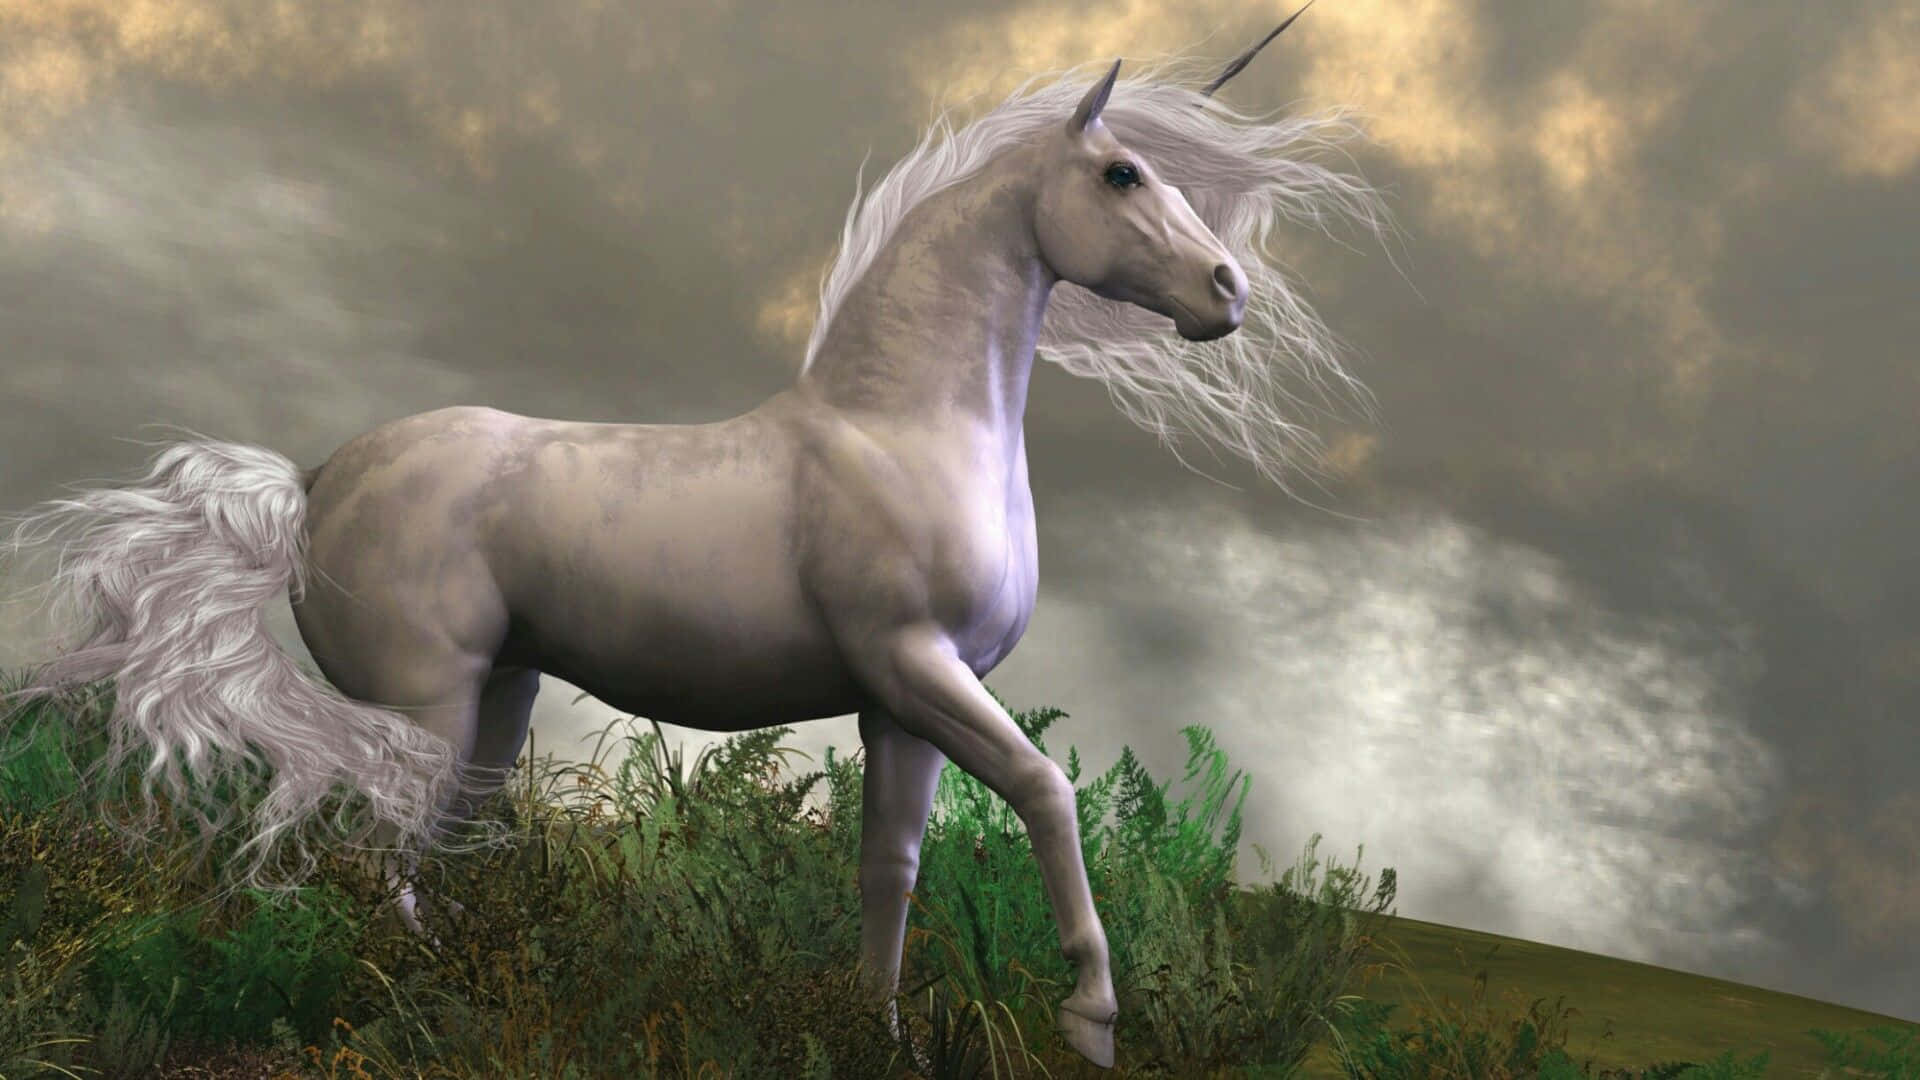 A Mythical White Unicorn Trots Gently In The Dark Forest